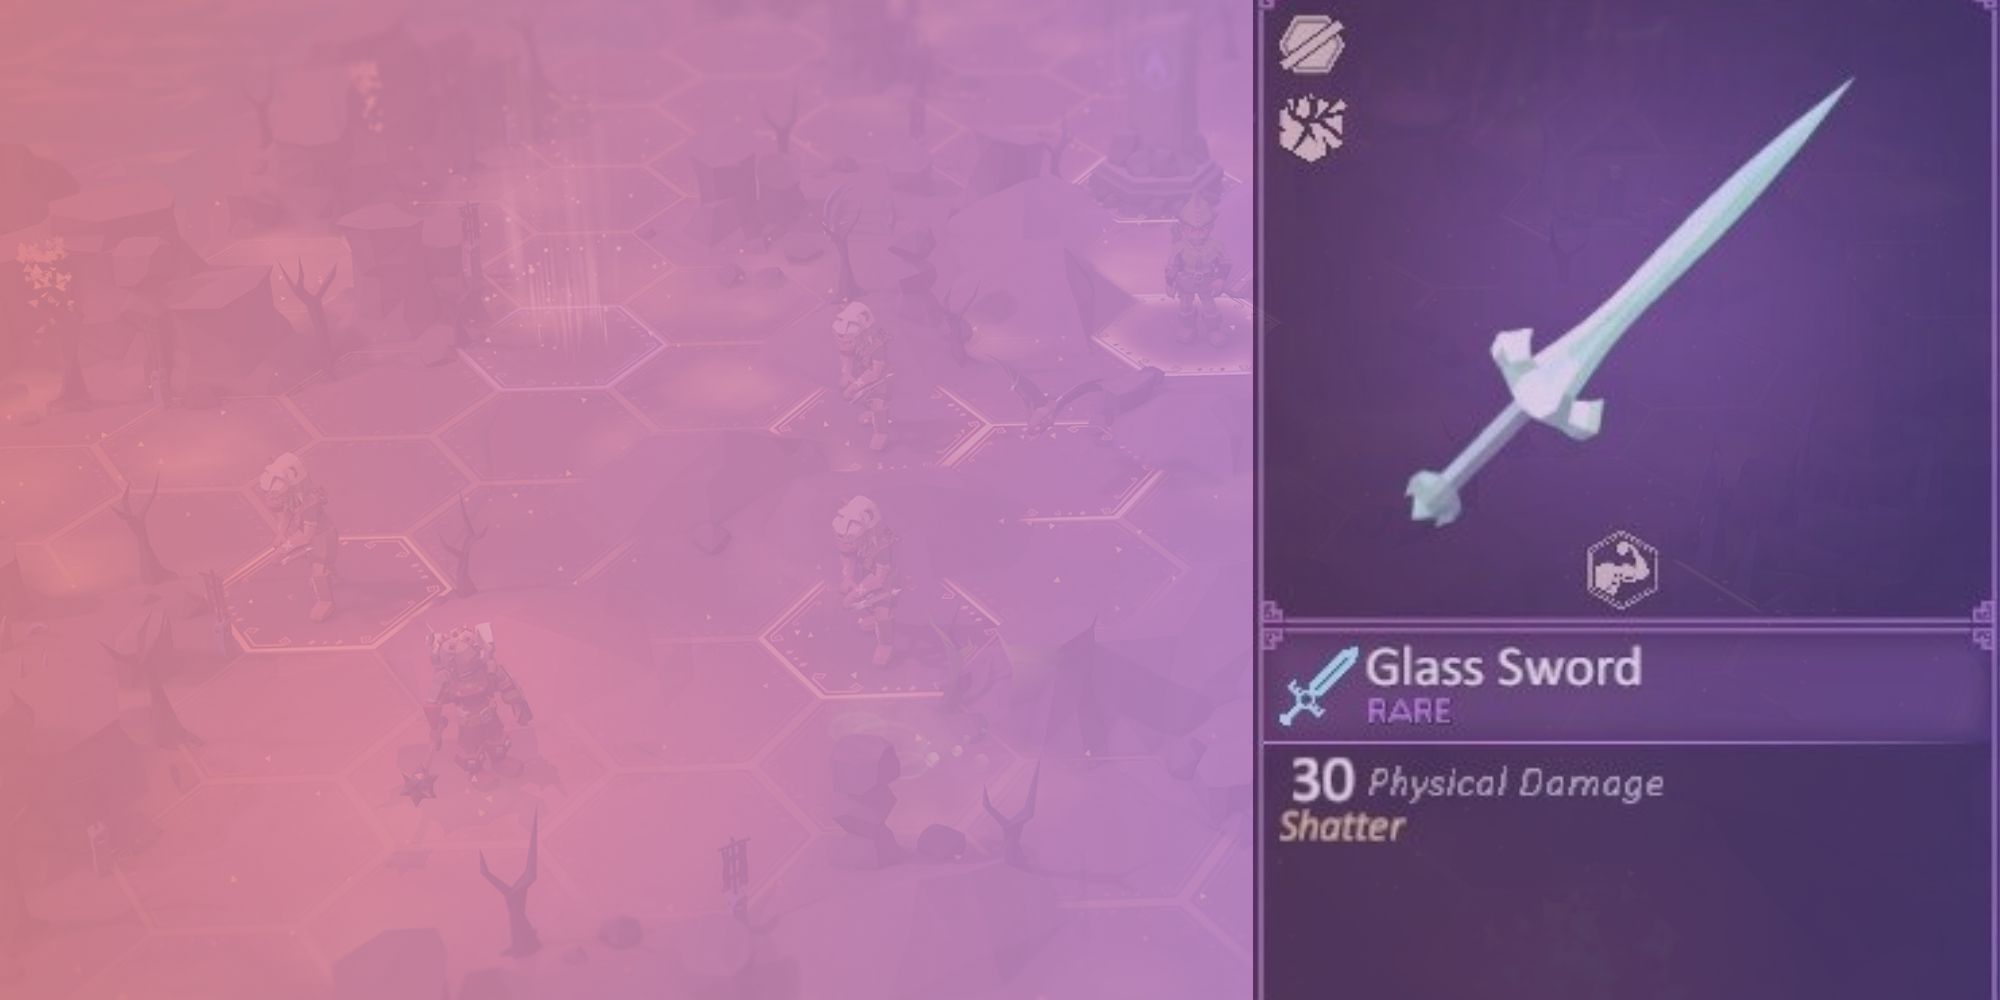 Glass sword stats over a pink and purple gradient background